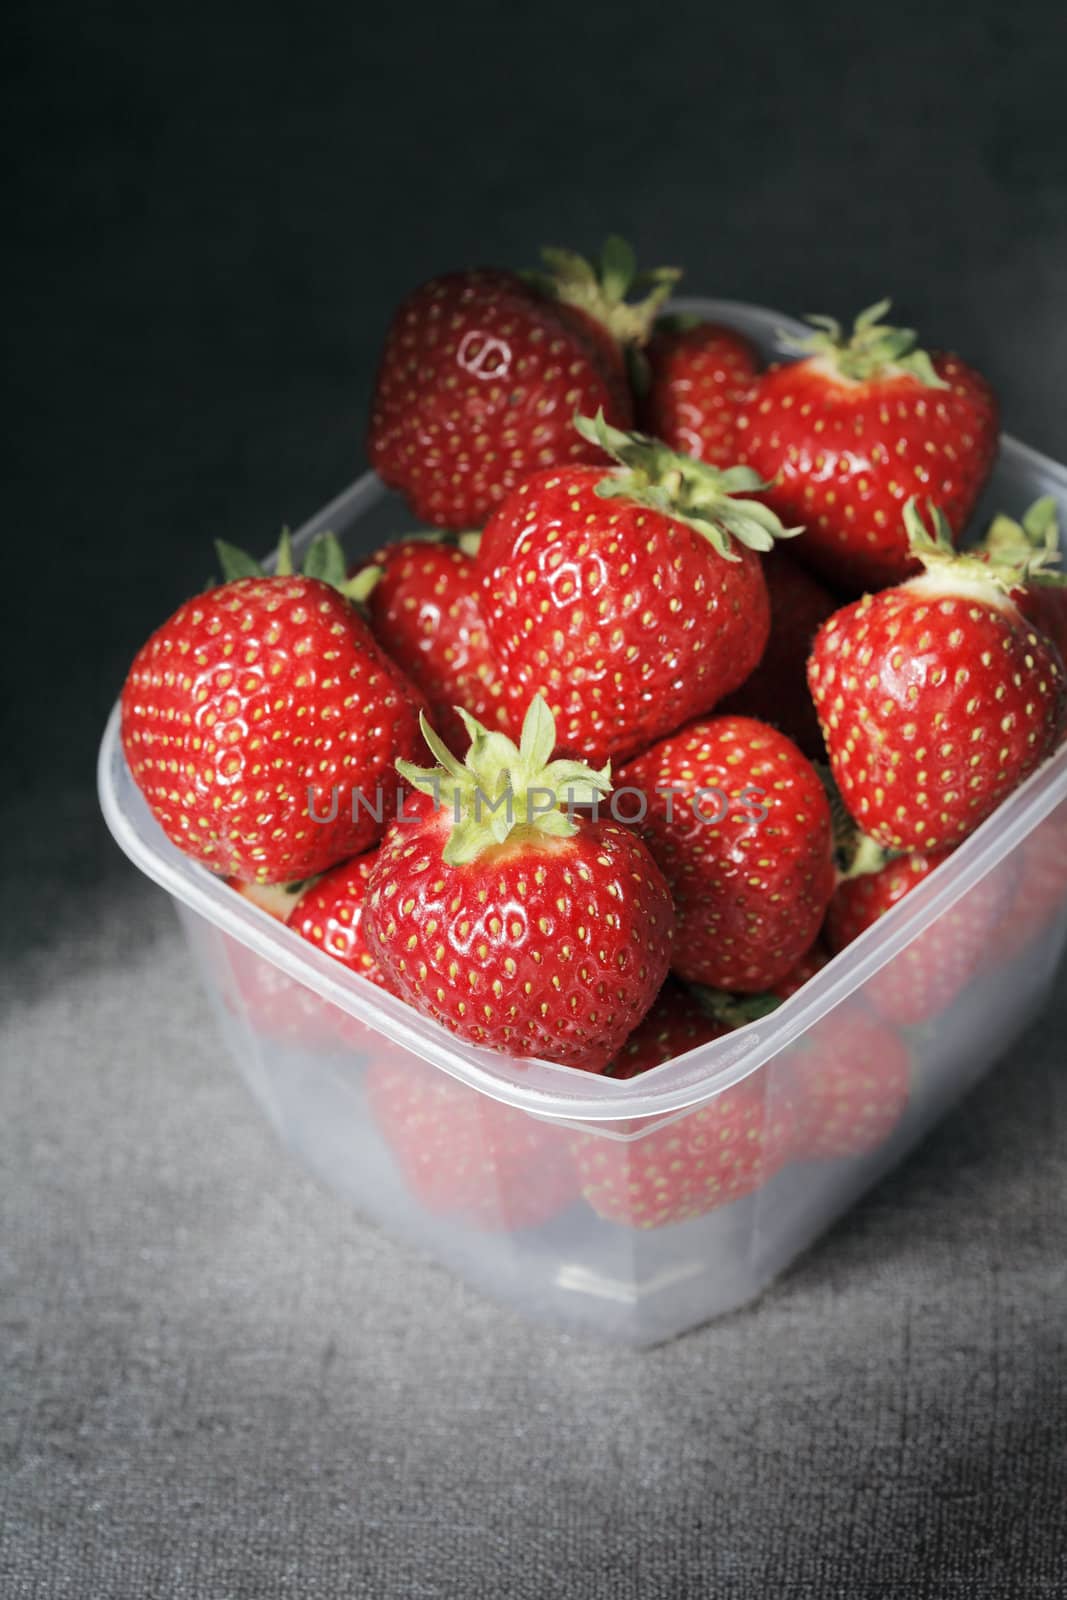 Strawberries in a plastic container. Short depth-of-field.